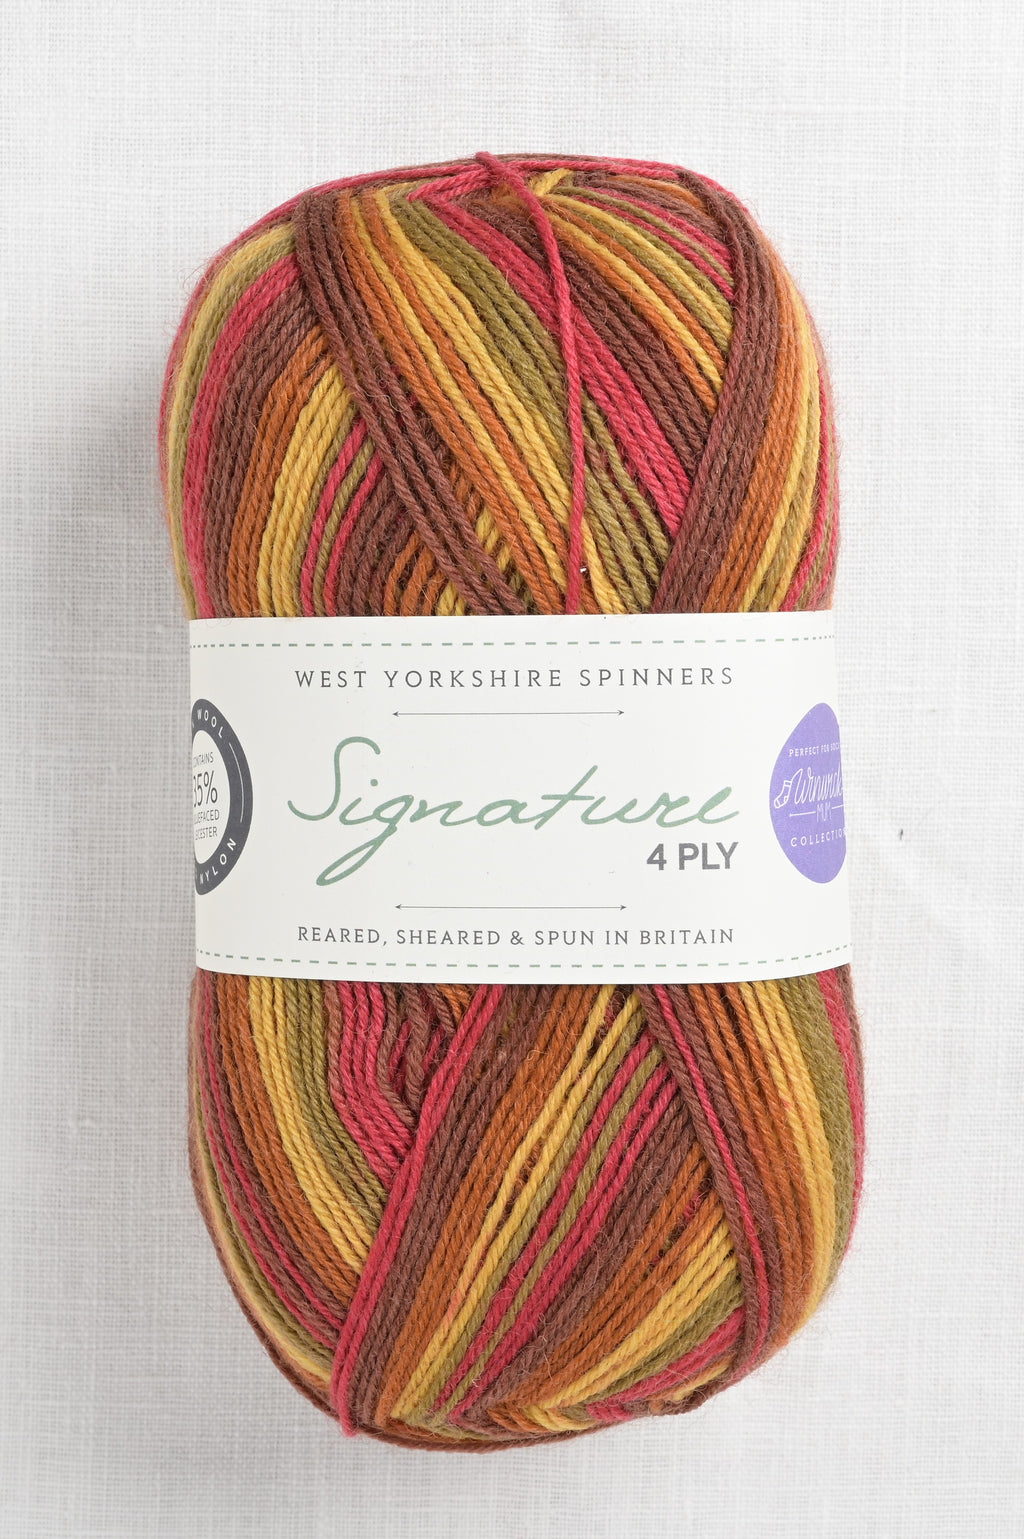 West Yorkshire Spinners Signature 4 Ply - Honeysuckle (234)